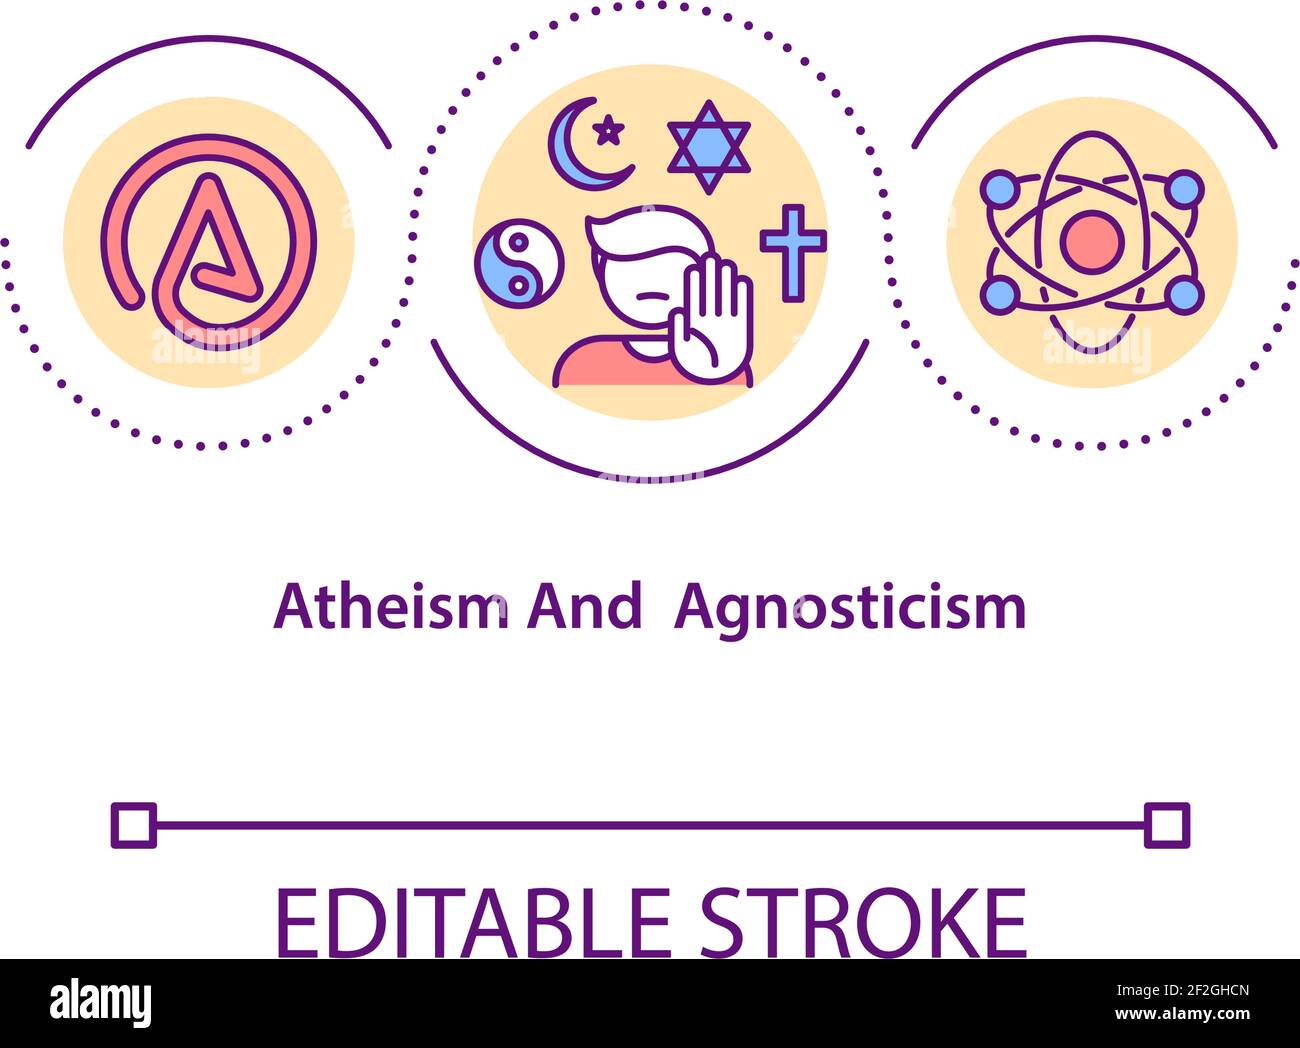 Atheism and agnosticism concept icon Stock Vector